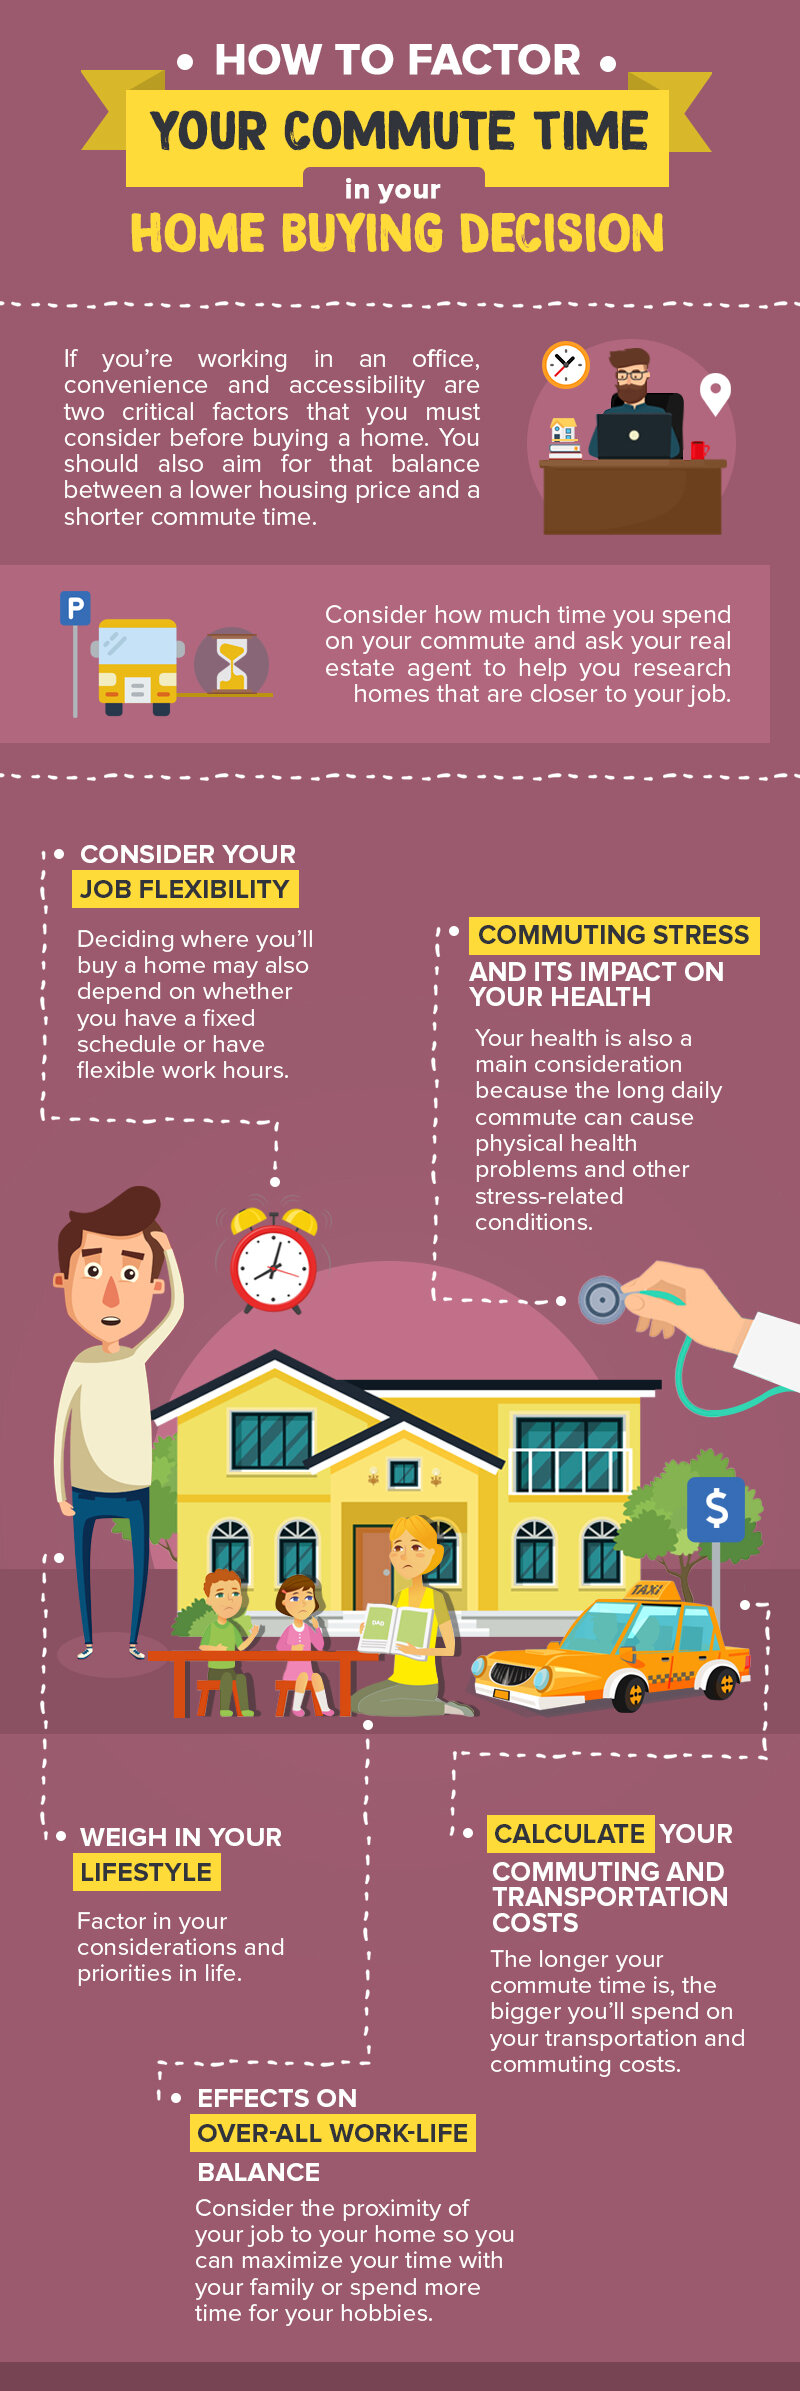 How To Factor Your Commute Time In Your Home Buying Decision